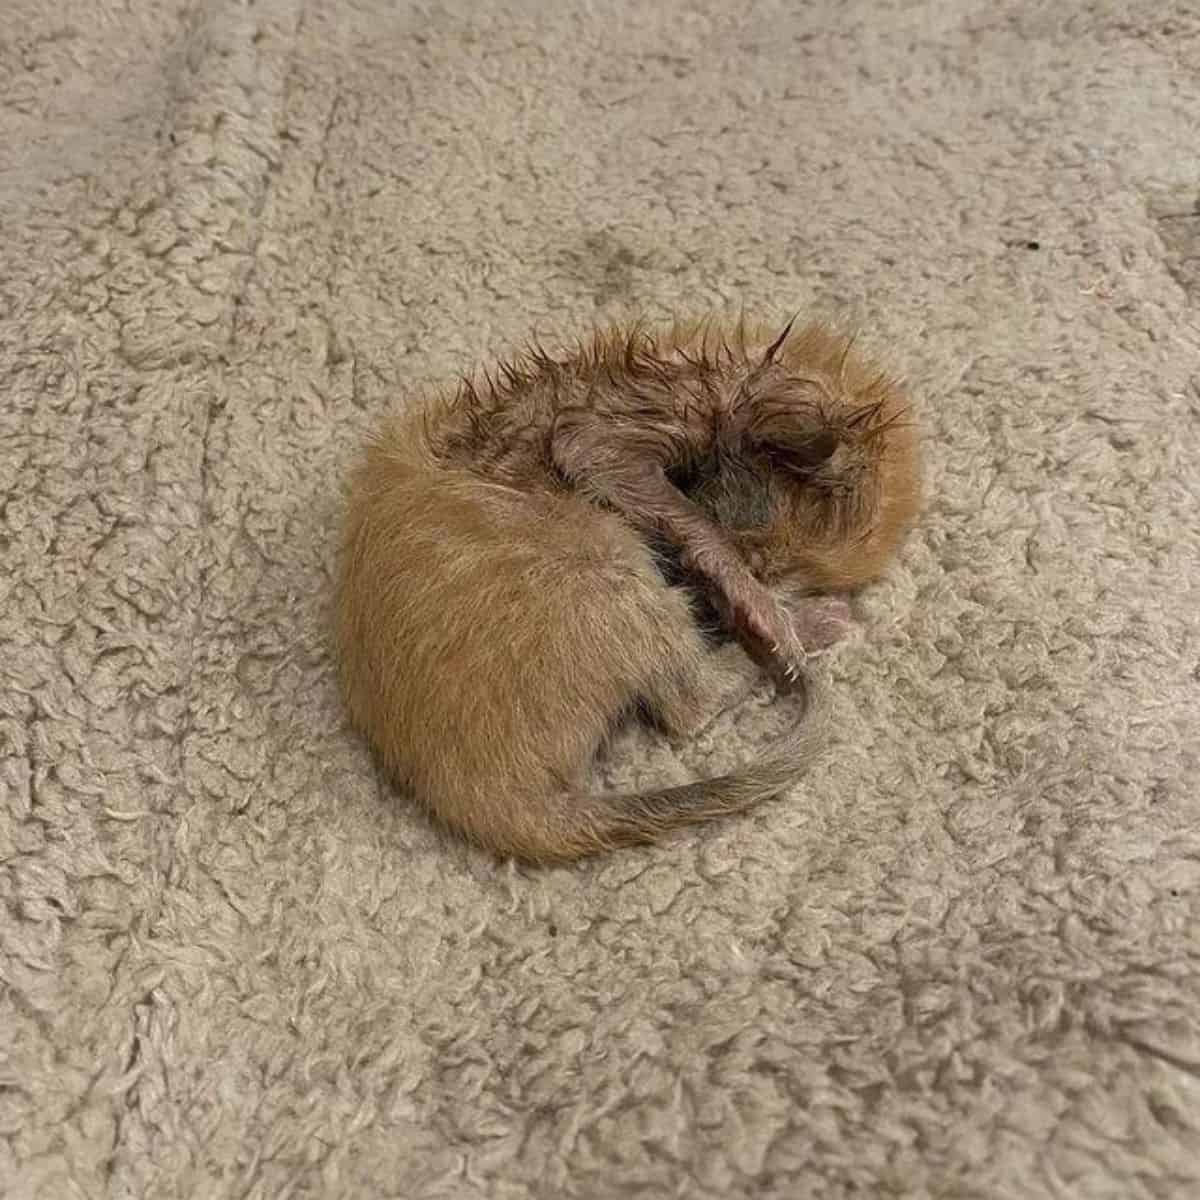 kitten curled up on the floor